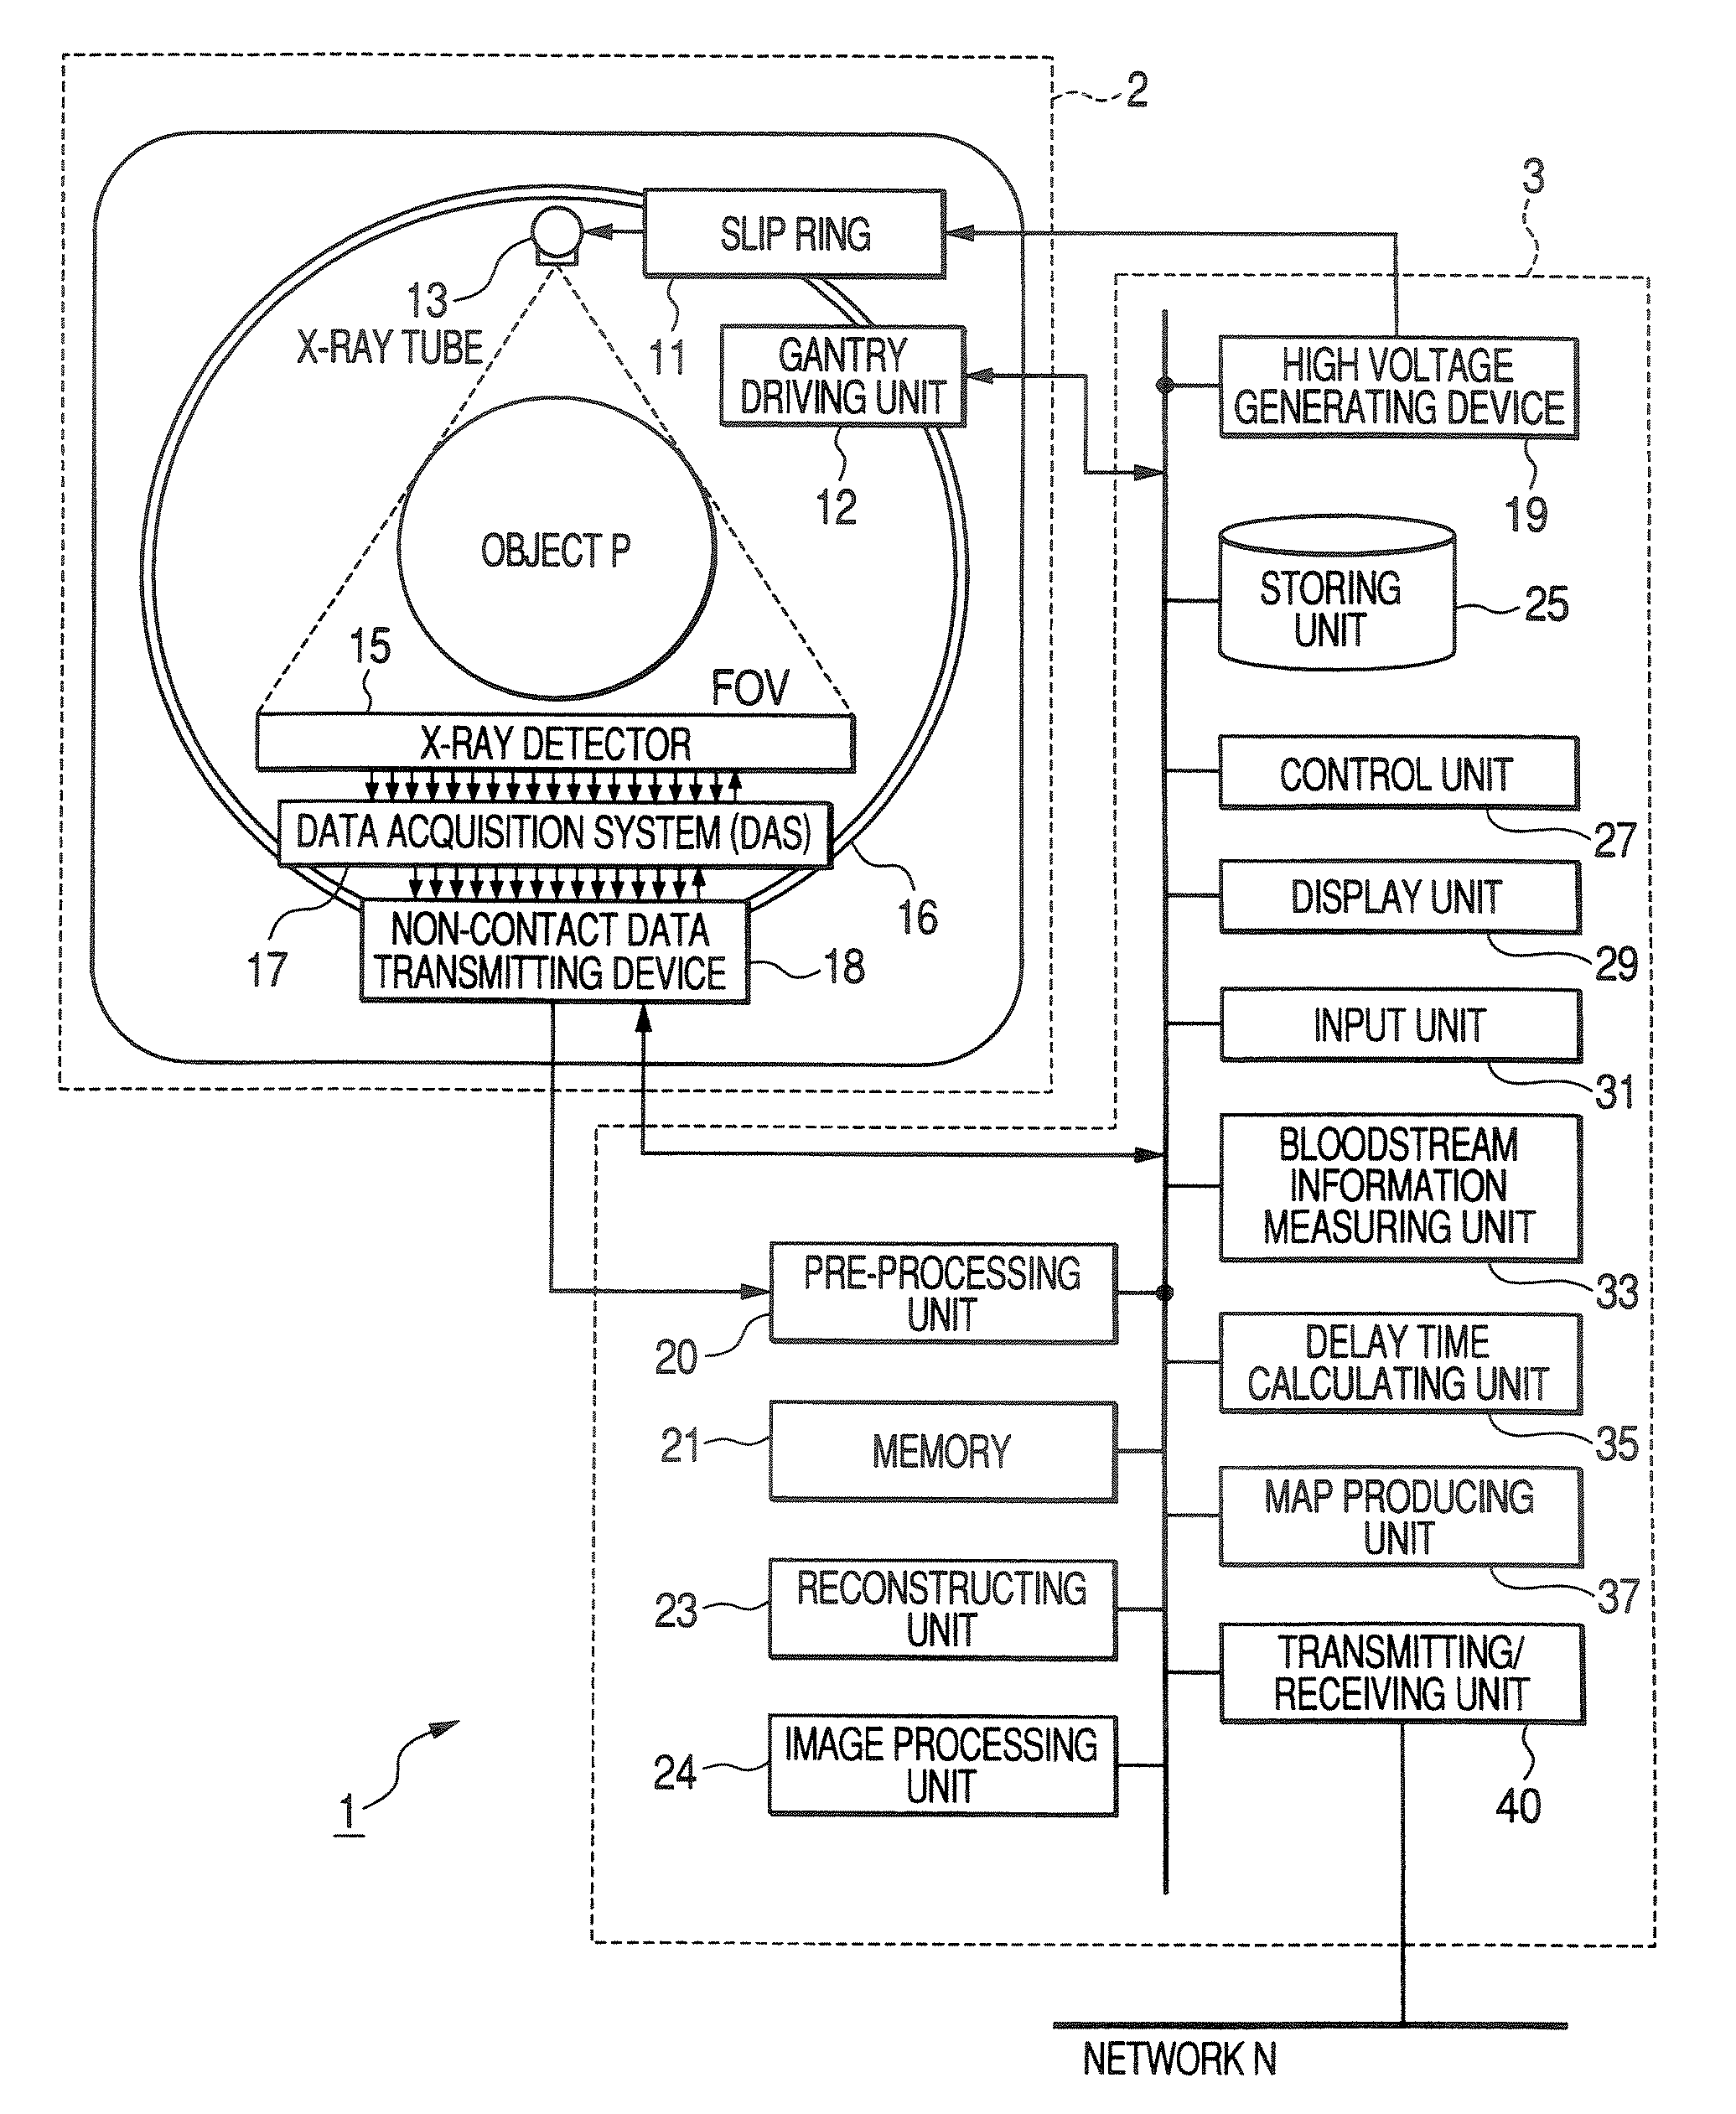 X-ray computed tomography apparatus and method of analyzing x-ray computed tomogram data